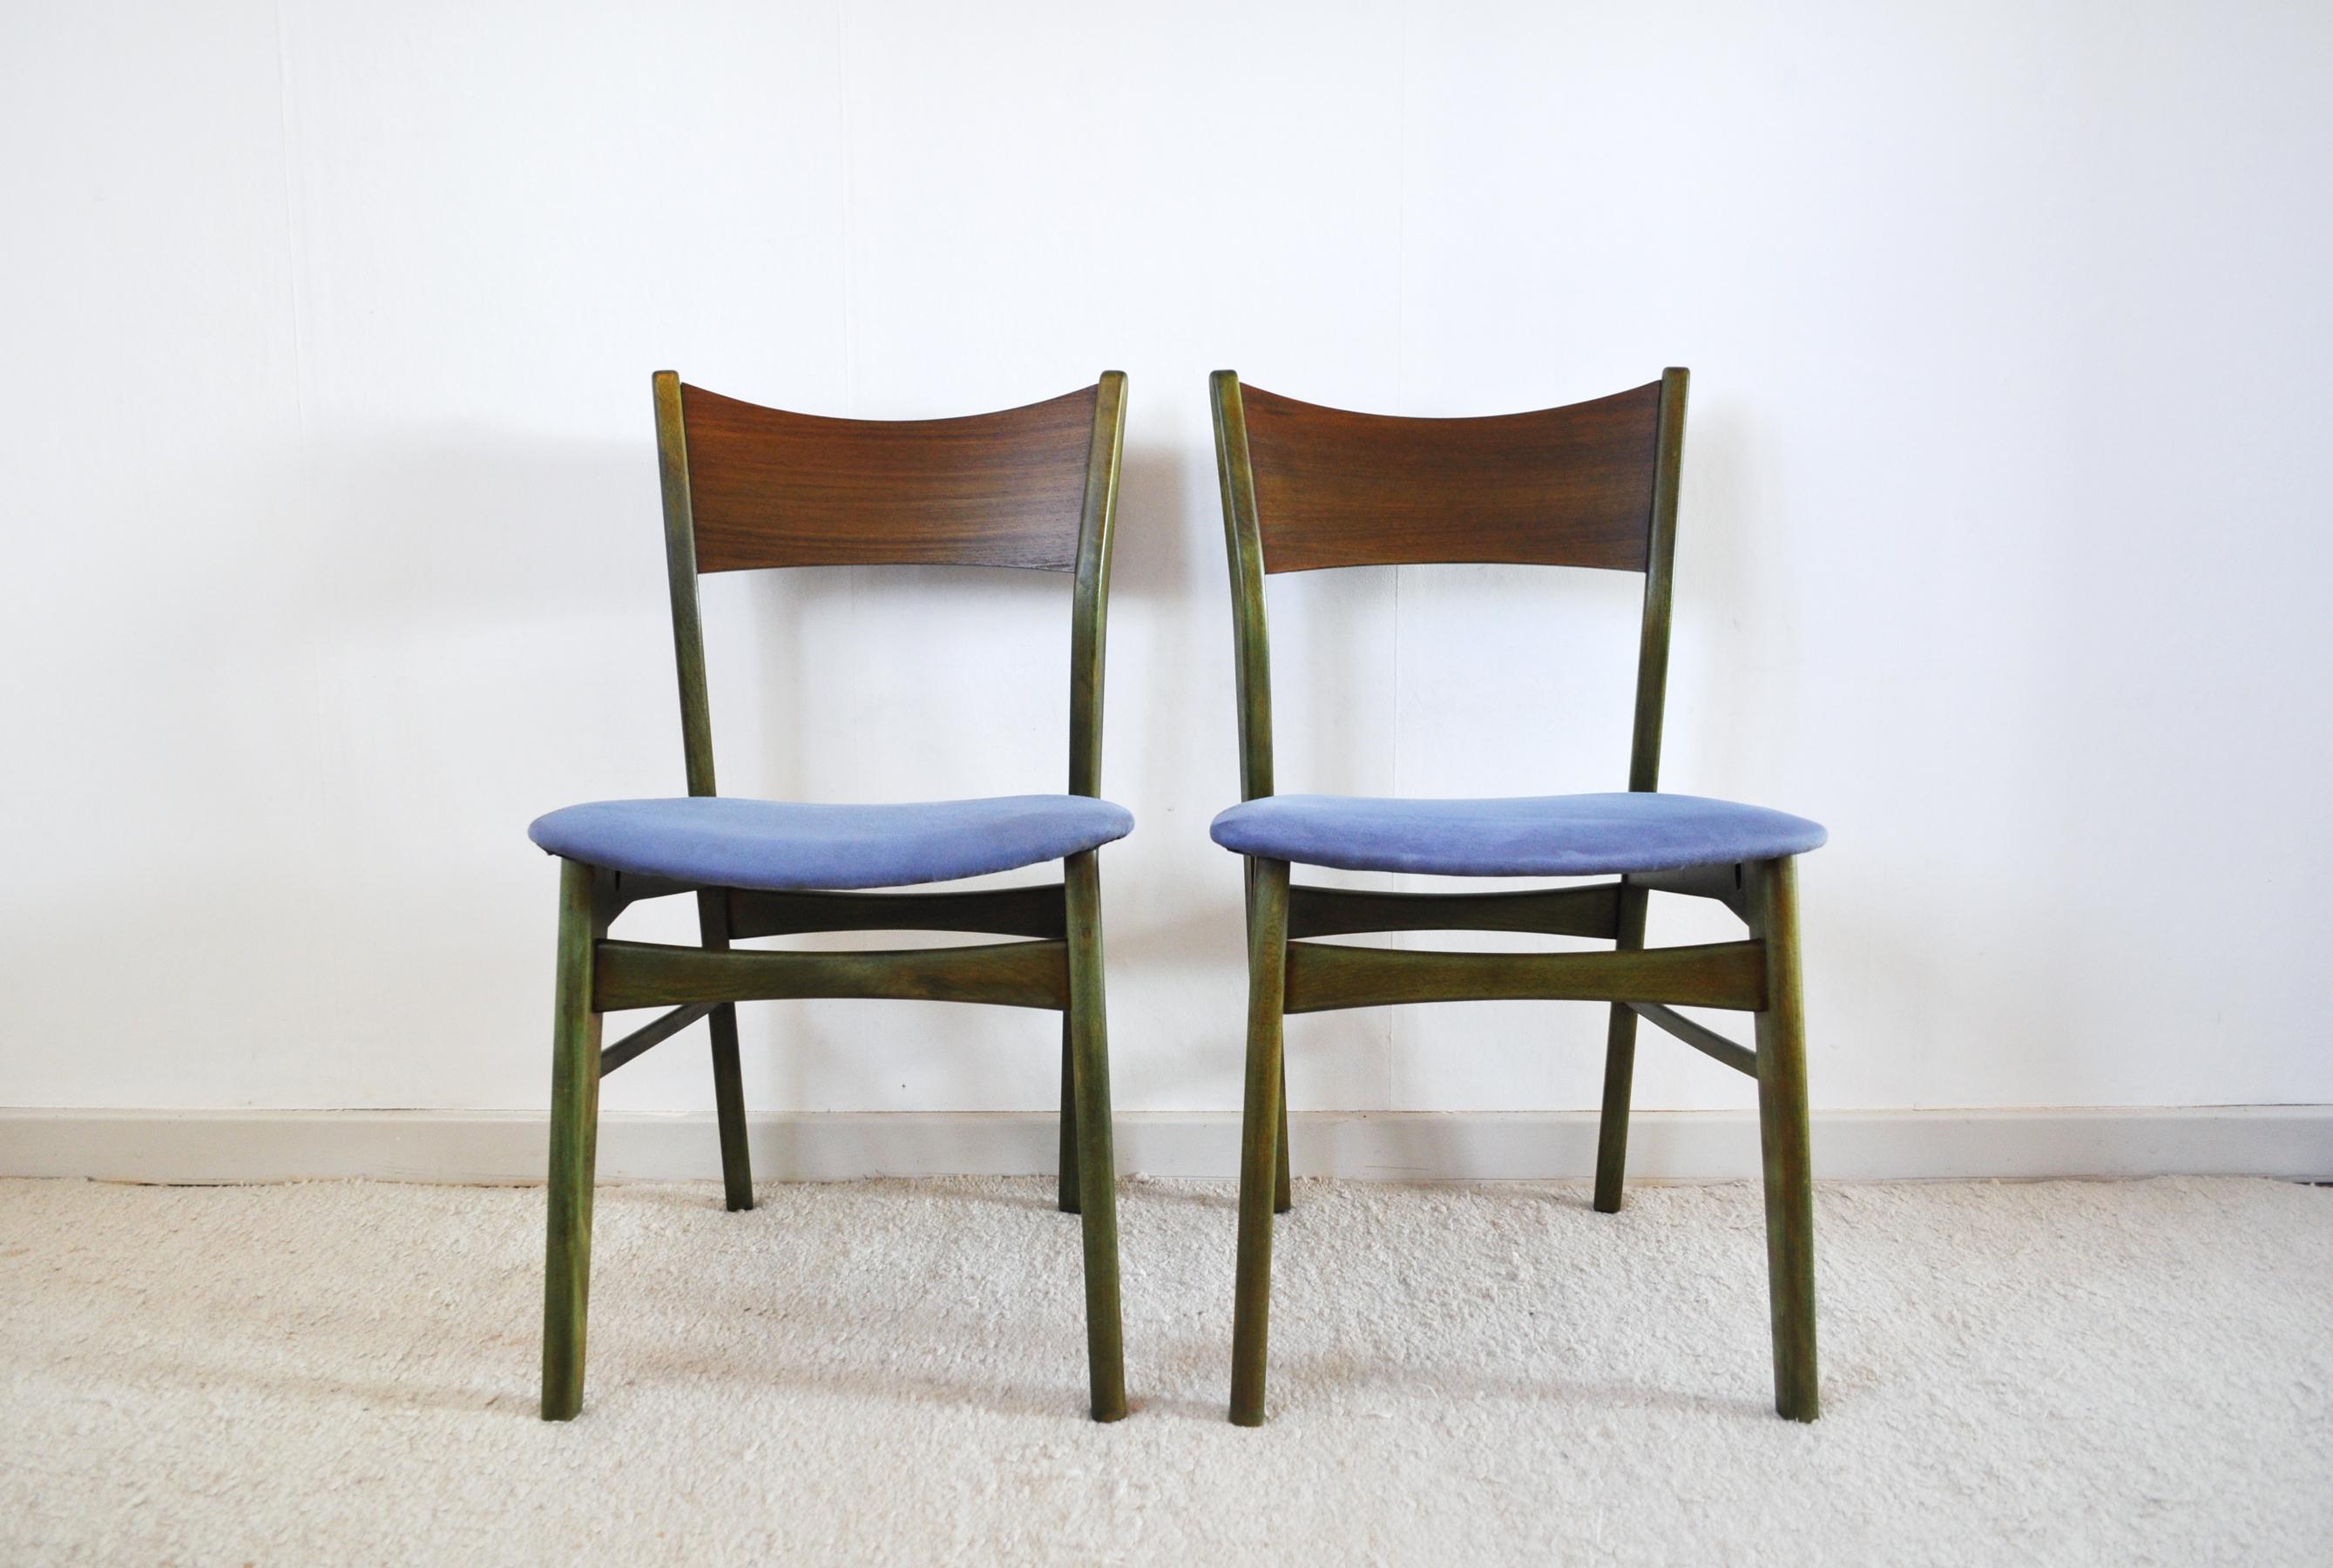 Two Danish modern dining chairs in teak and beech stained and vanished in an emerald color.
Signs of wear. Small repairs.